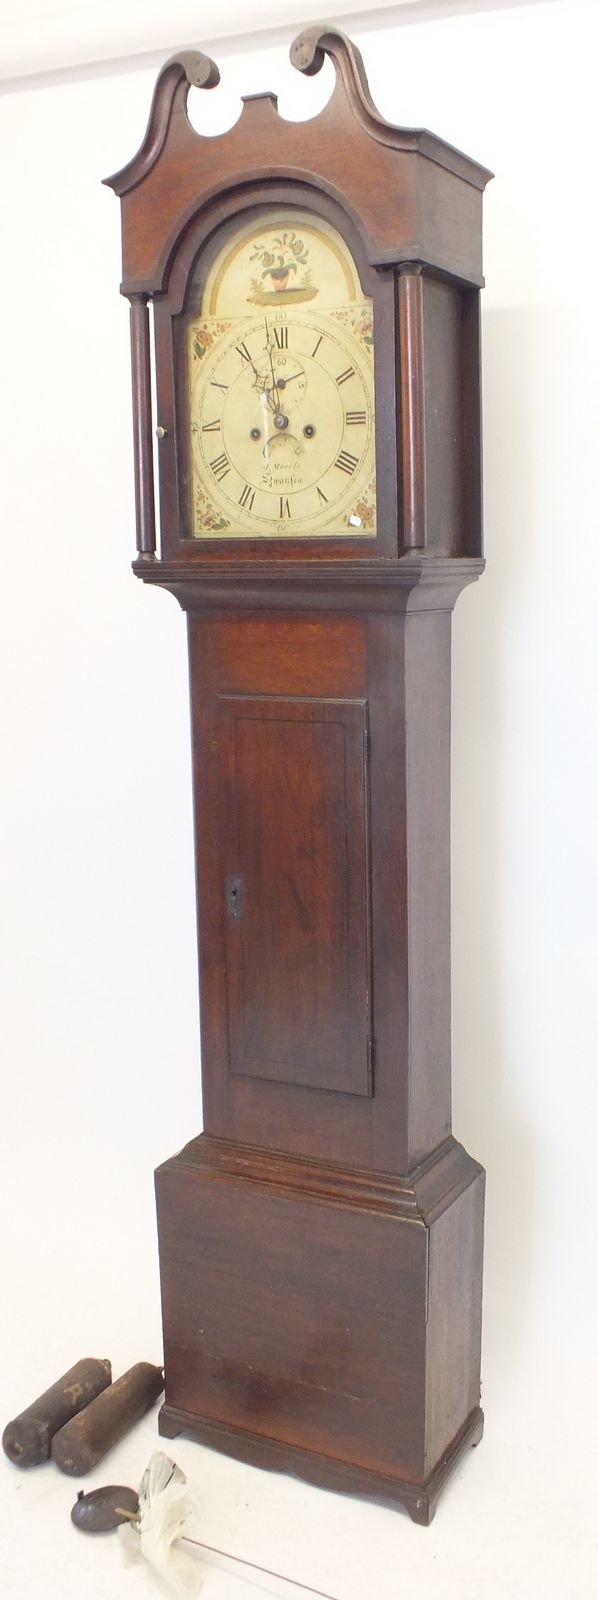 An 18th century oak longcase clock with painted dial by J Moseley, Swansea, eight day striking